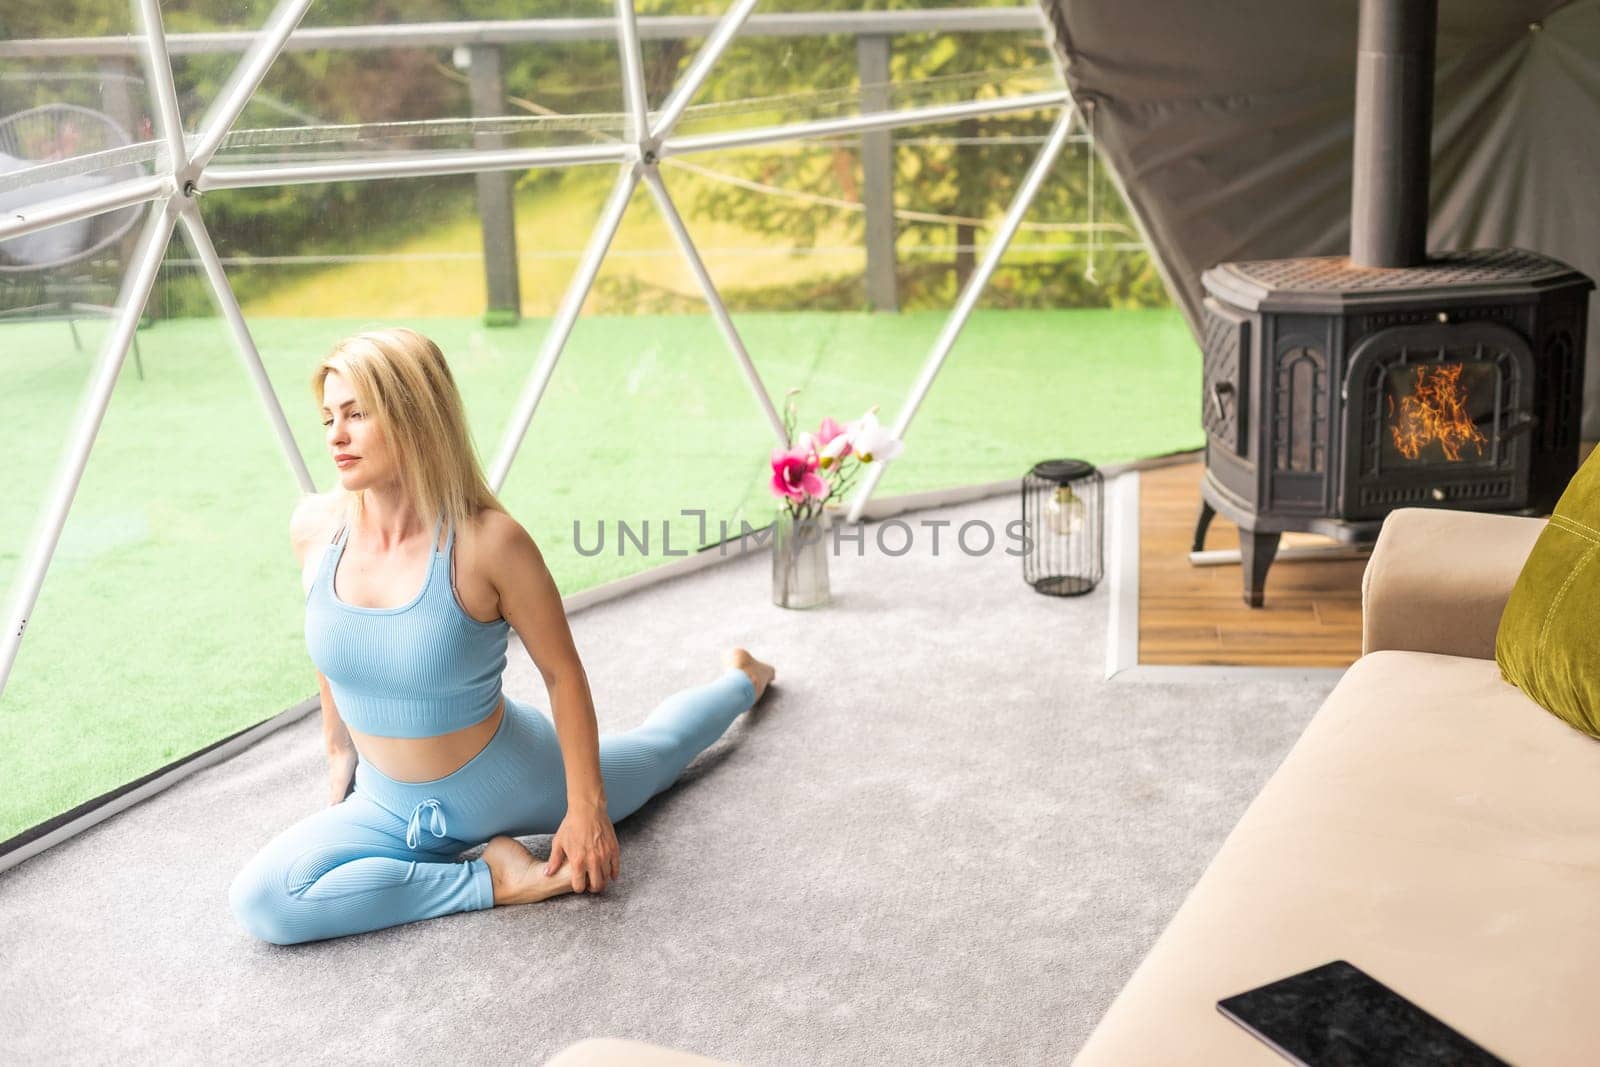 A woman is in a geo dome glamping tent. Glamping vacation lifestyle concept. by Andelov13